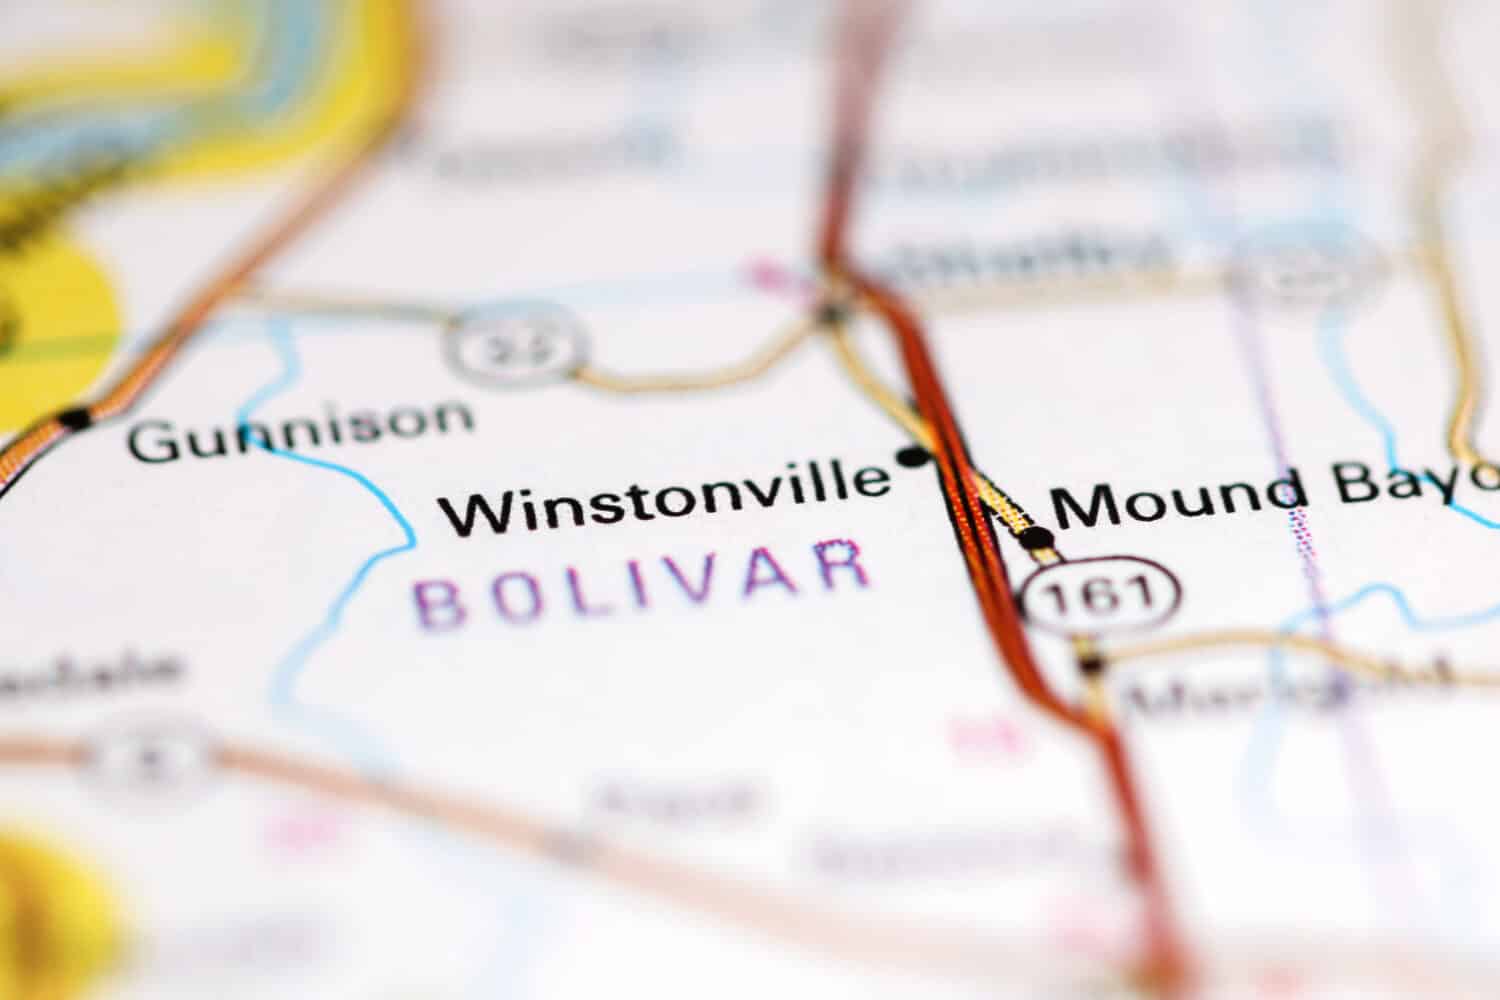 Winstonville. Mississippi. USA on a geography map